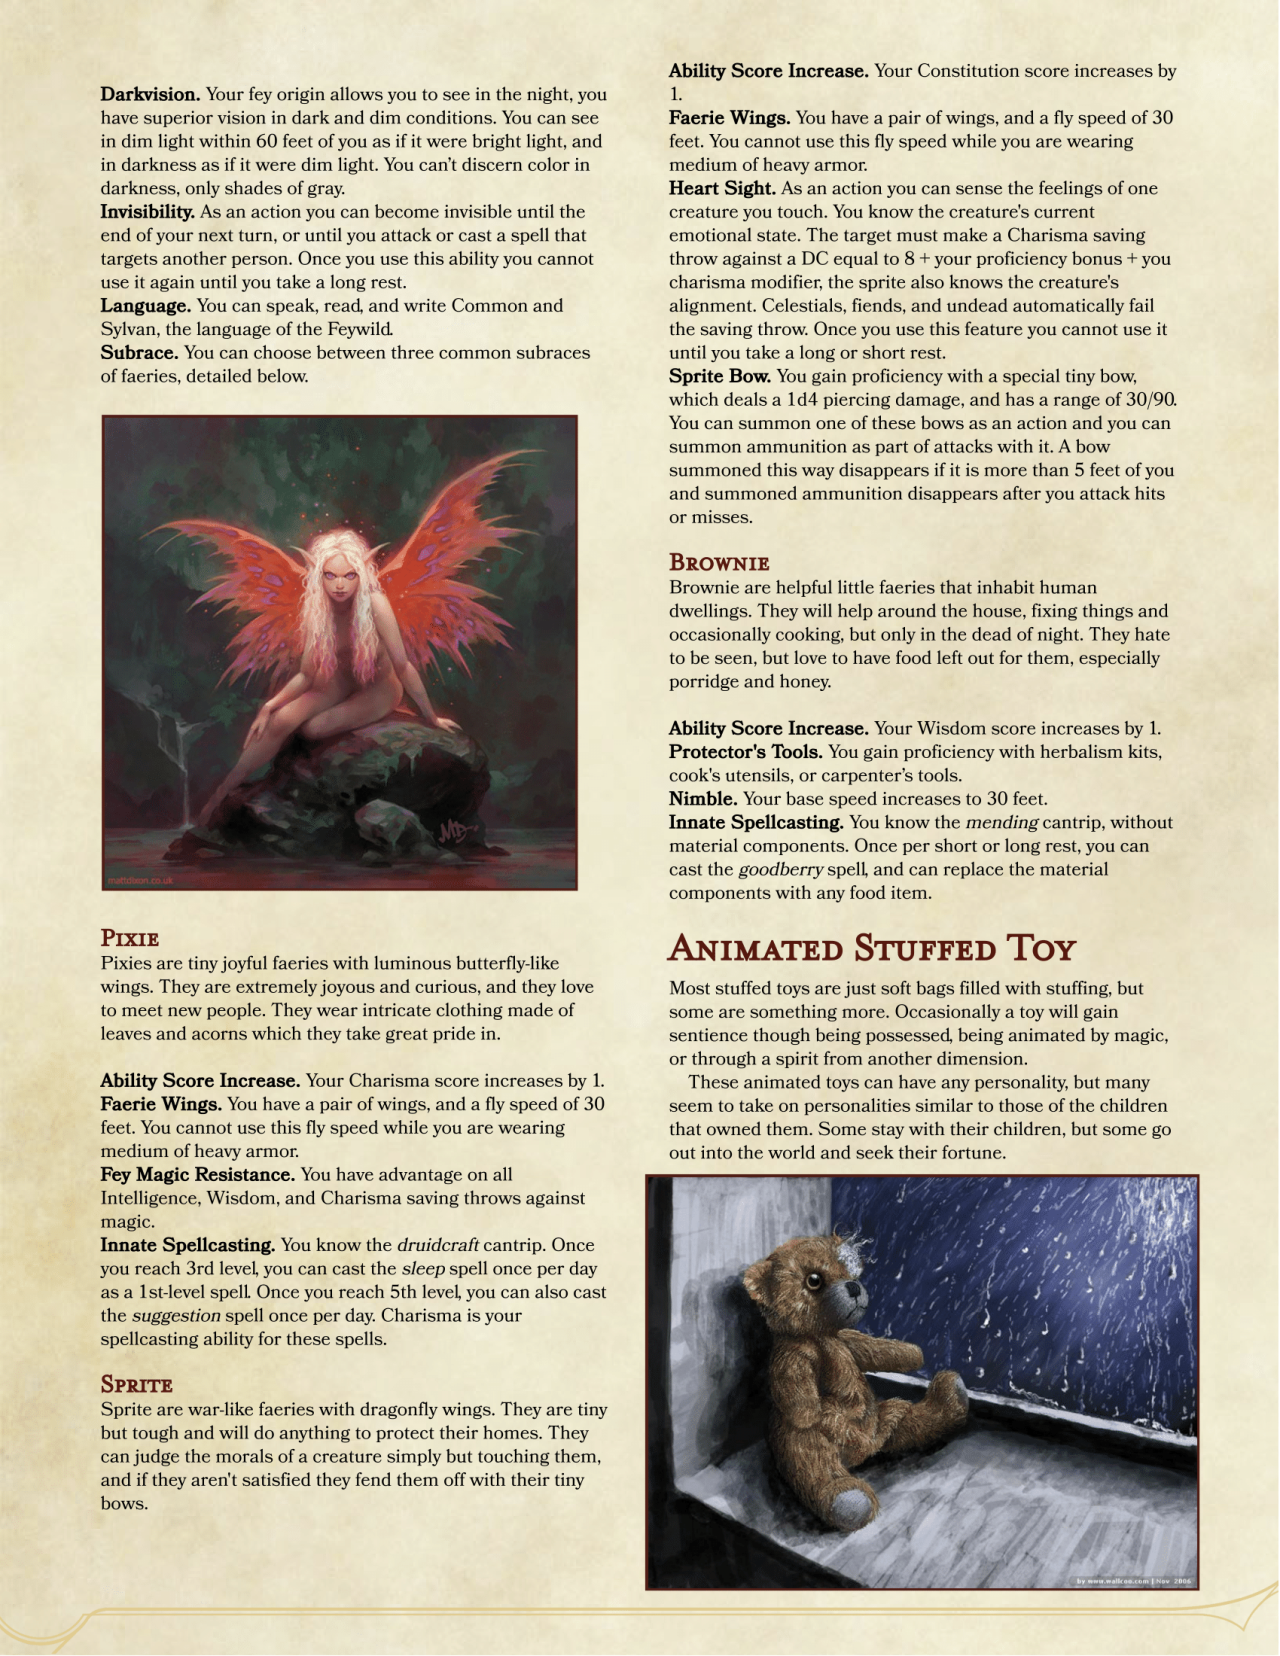 DnD 5e Homebrew — Tiny Creature Races by Valyr_Knight